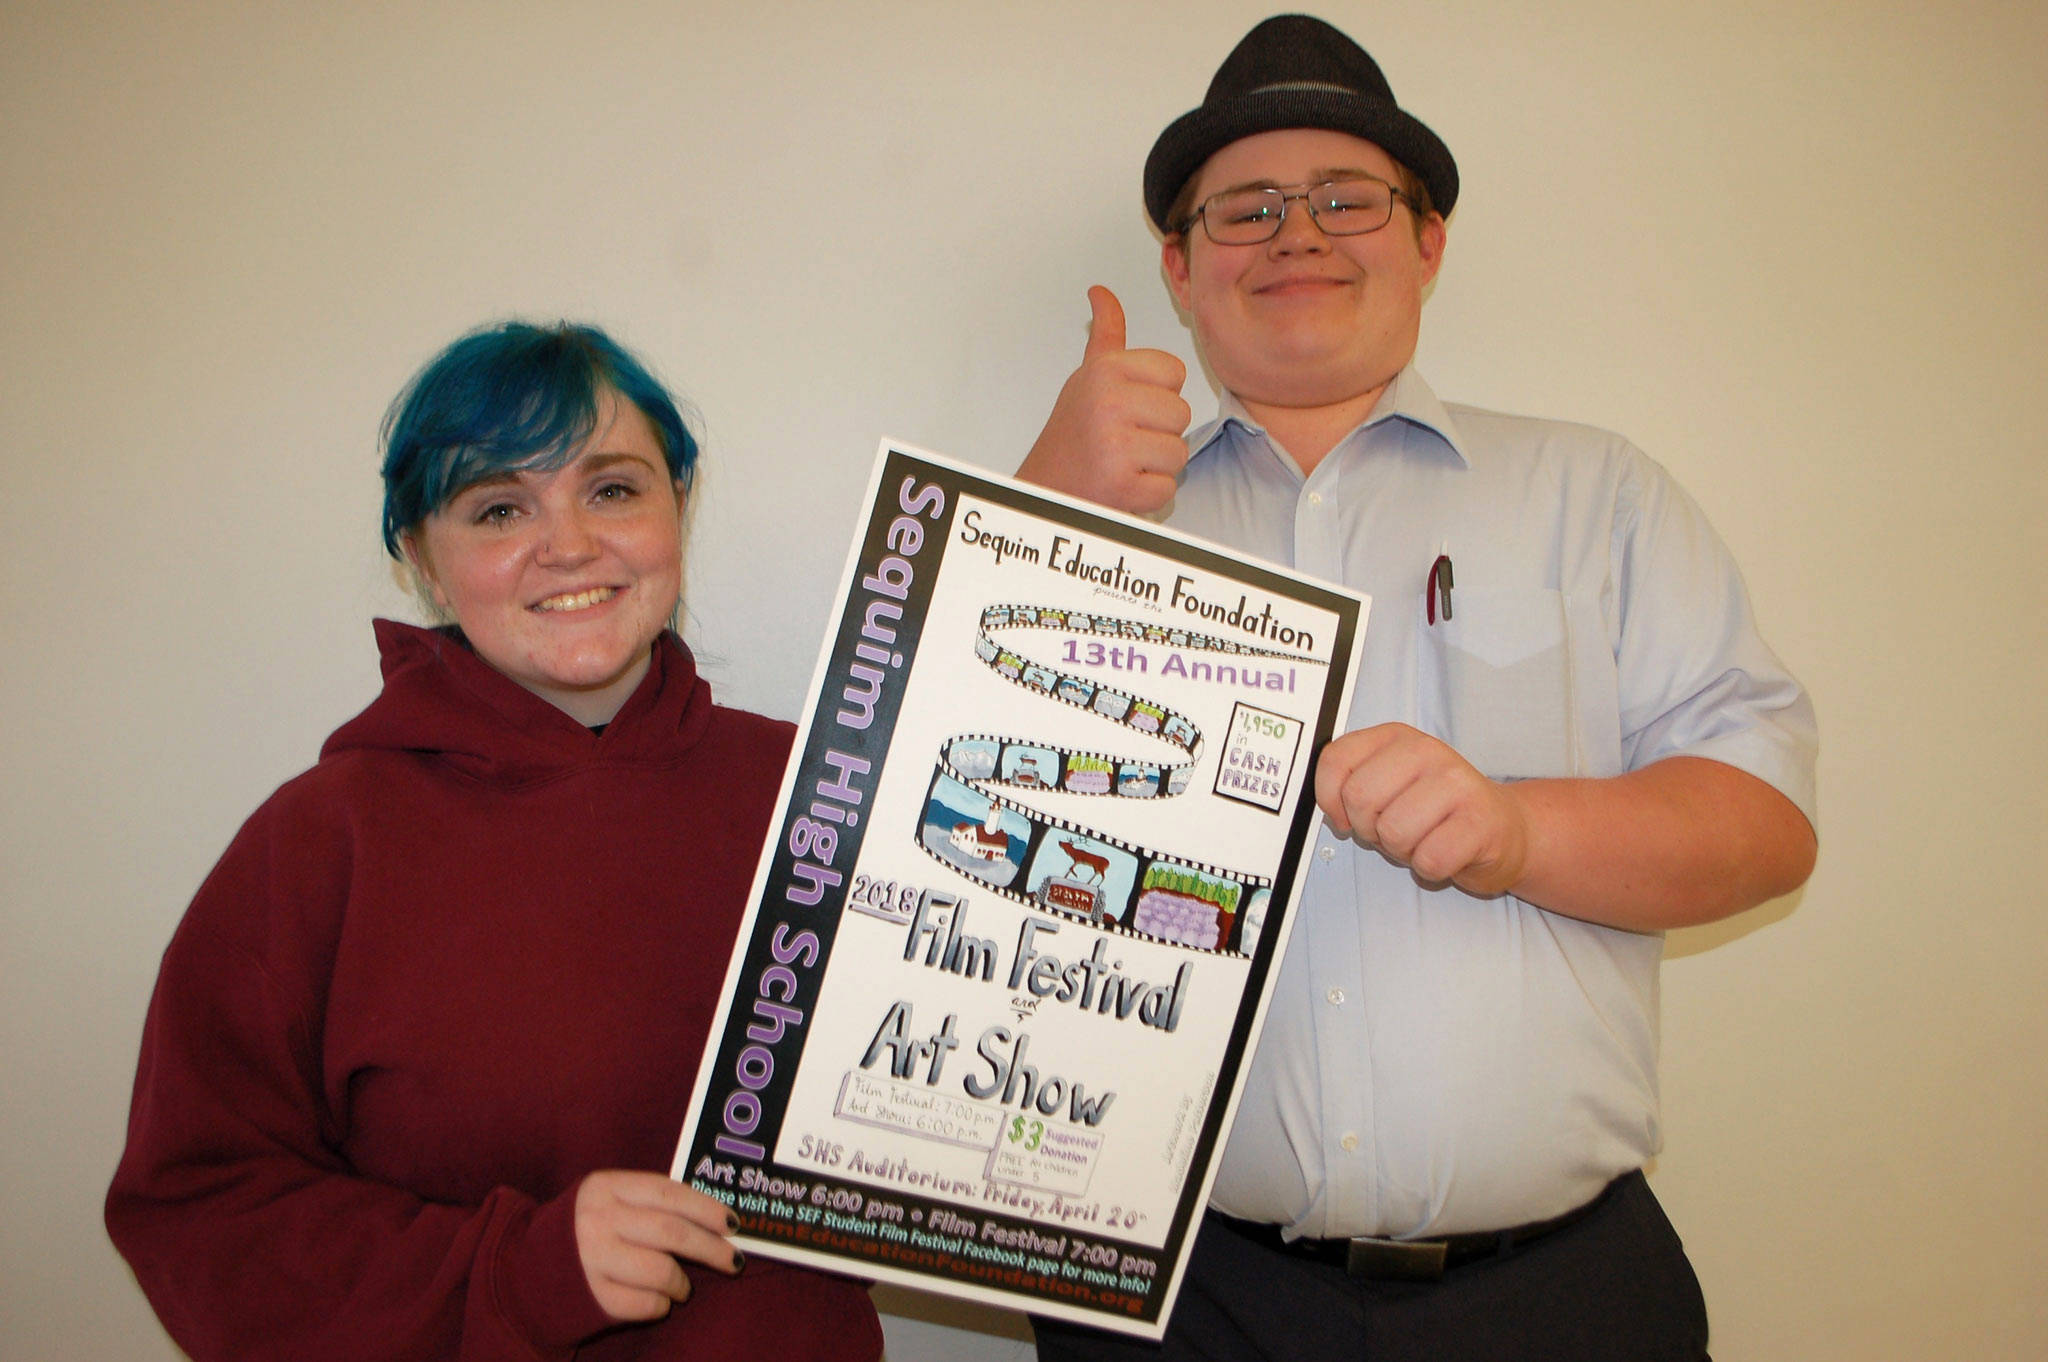 Sequim High School students Abygail Mundy and Jackson Lindorfer will serve as emcees at the 13th annual Sequim Education Foundation Student Film Festival and Art Show. (Erin Hawkins/Olympic Peninsula News Group)